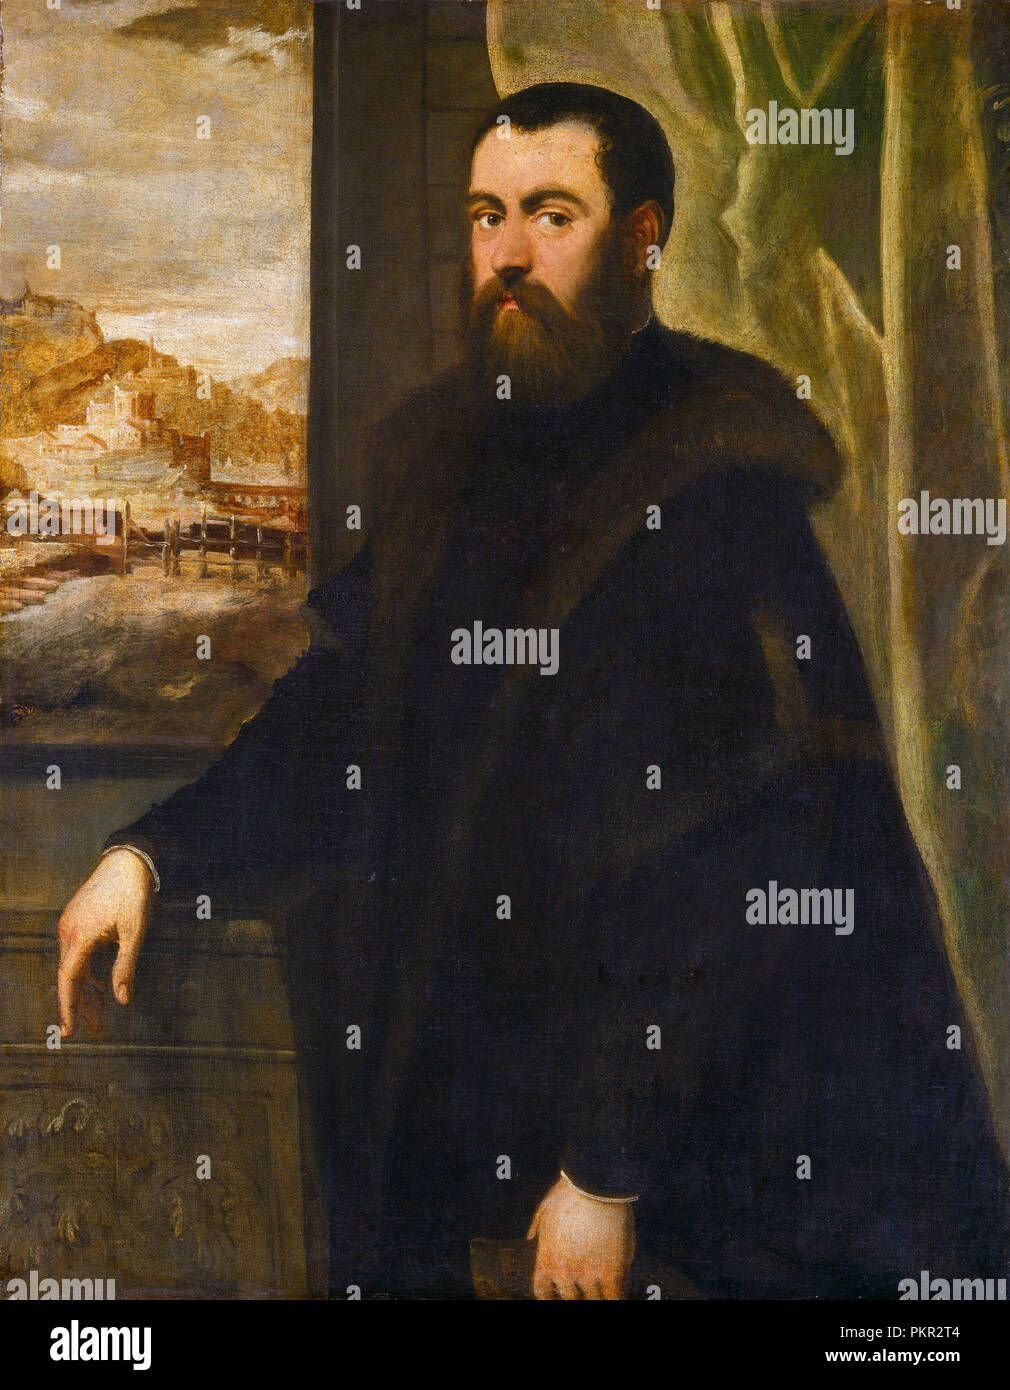 Portrait of a Venetian Senator. Dated: c. 1570. Dimensions: overall: 110.5 x 88 cm (43 1/2 x 34 5/8 in.)  framed: 141.6 x 118.1 cm (55 3/4 x 46 1/2 in.). Medium: oil on canvas. Museum: National Gallery of Art, Washington DC. Author: Jacopo Tintoretto. Stock Photo